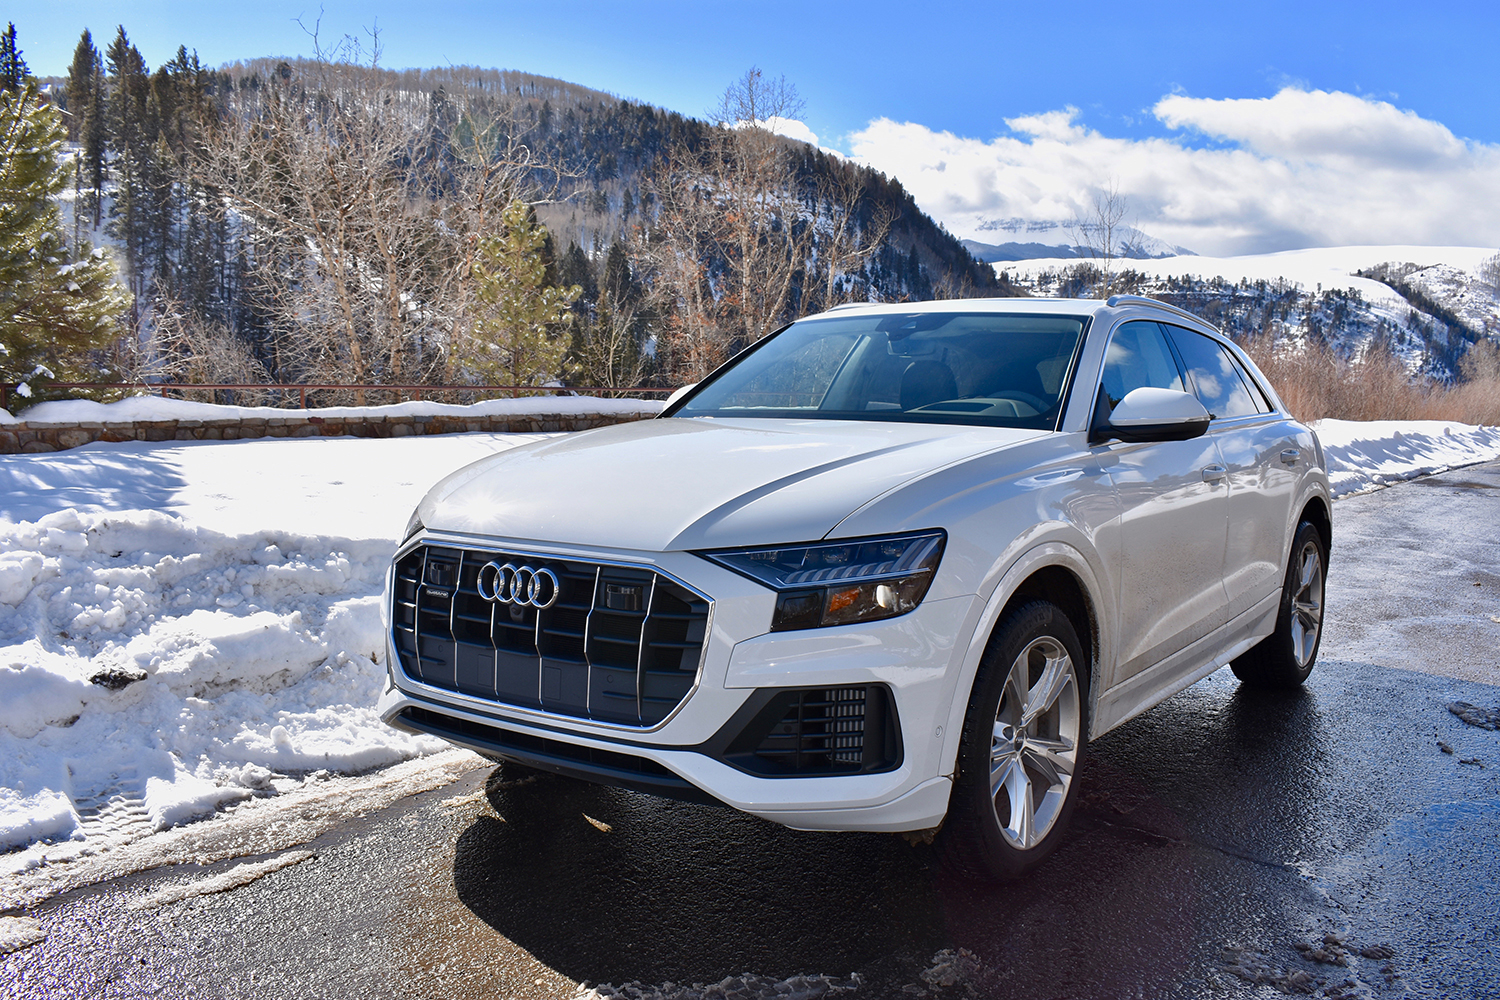 2019 Audi Q8  Audi's high-tech flagship Q8 SUV is perfect for an